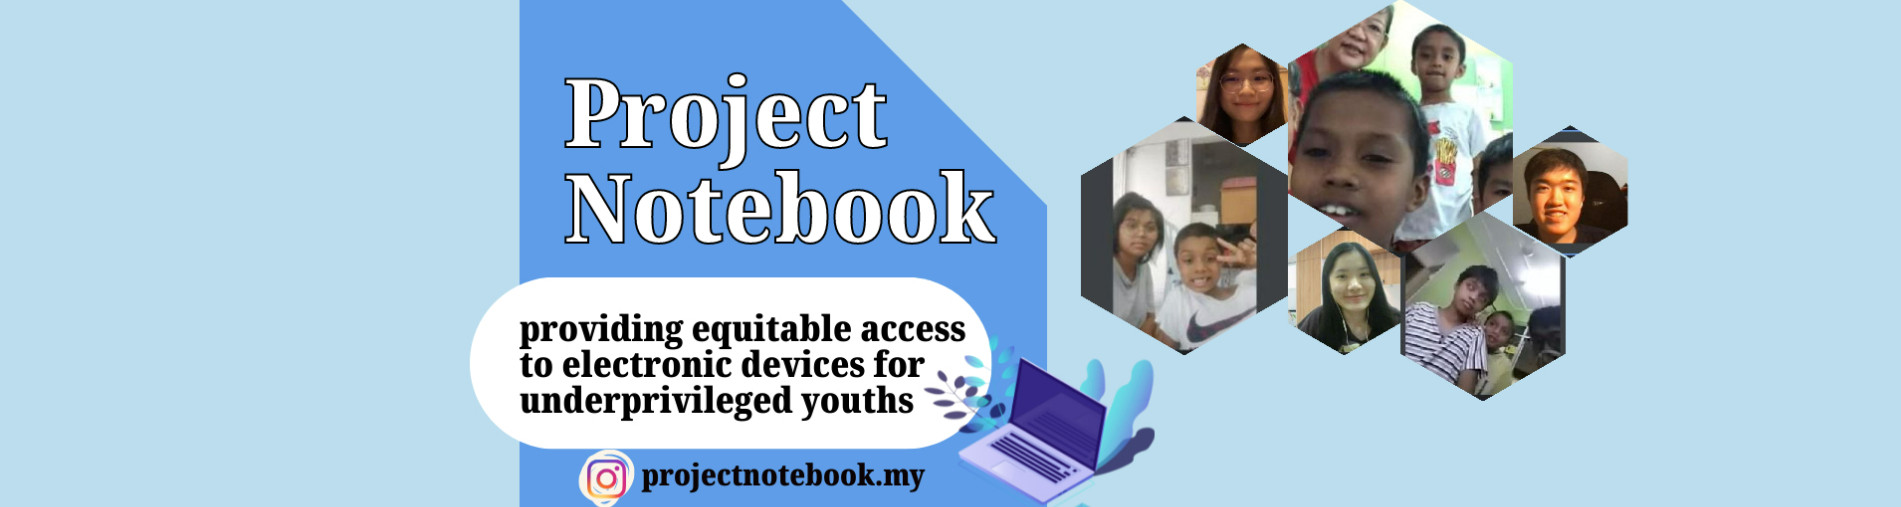 Project Notebook Fundraiser